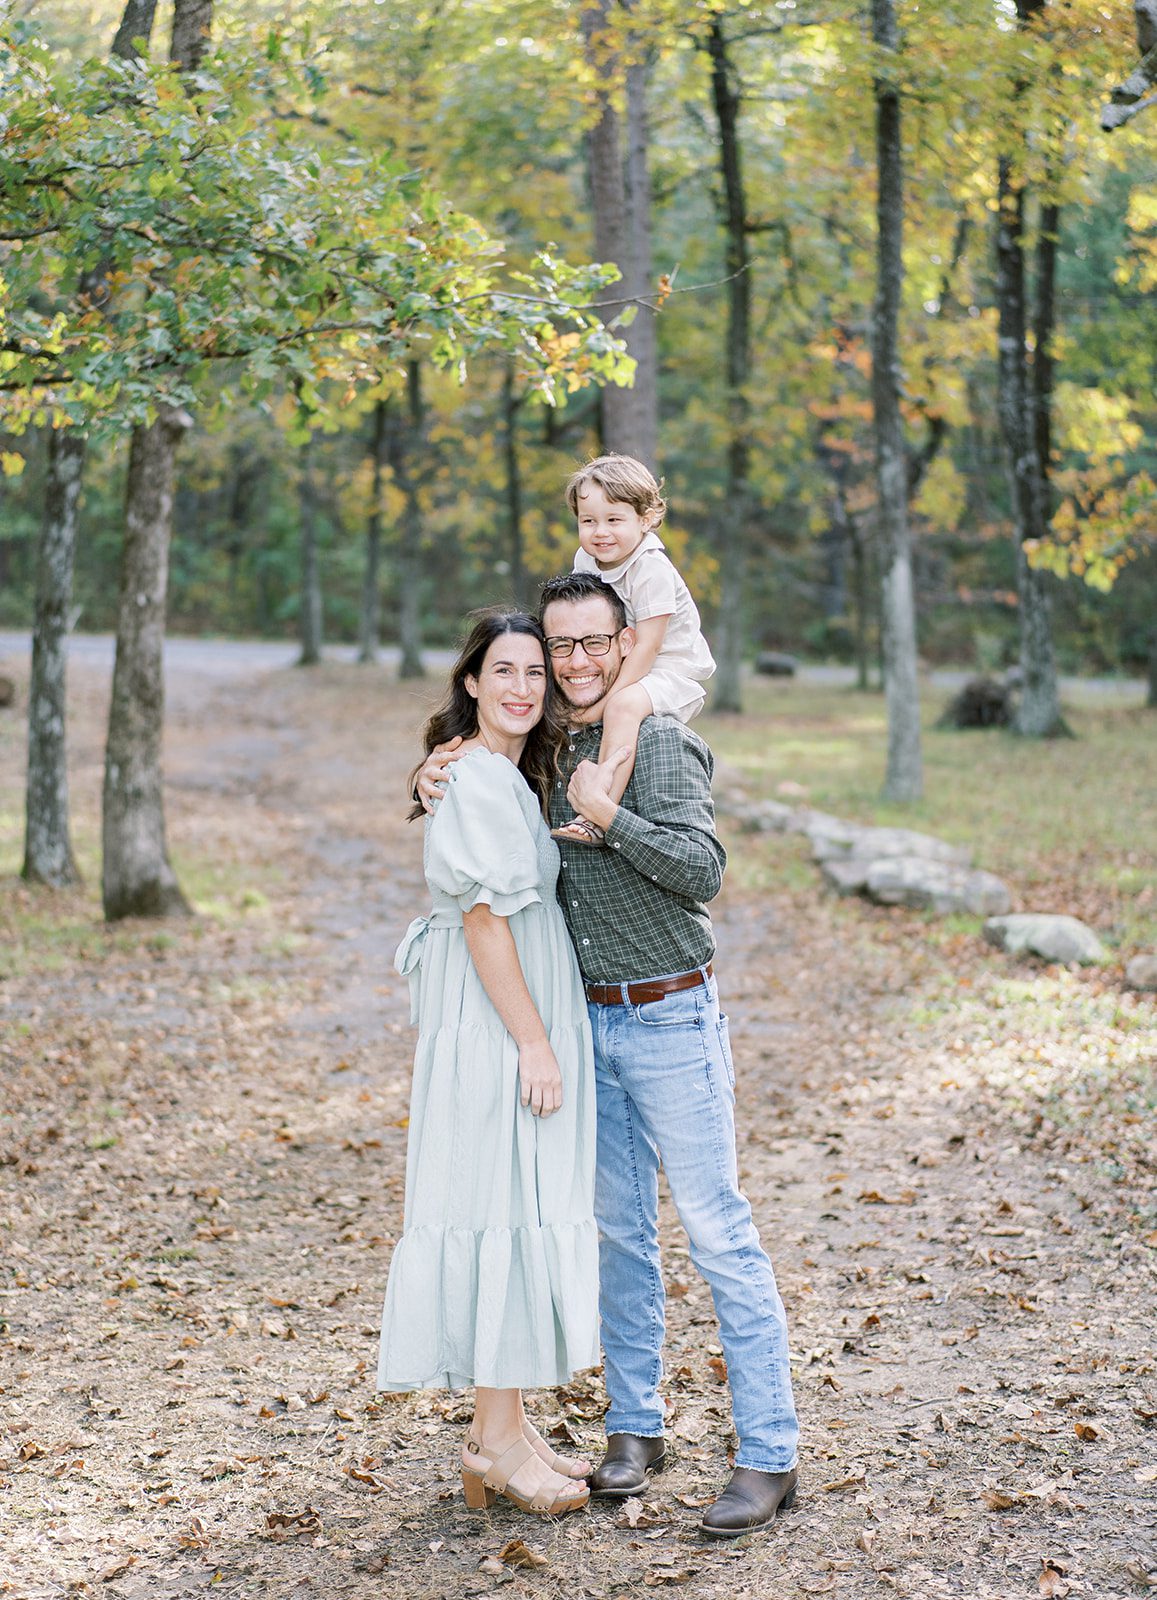 A family smiles with fallen autumn leaves at Brow Park in Mentone, Alabama